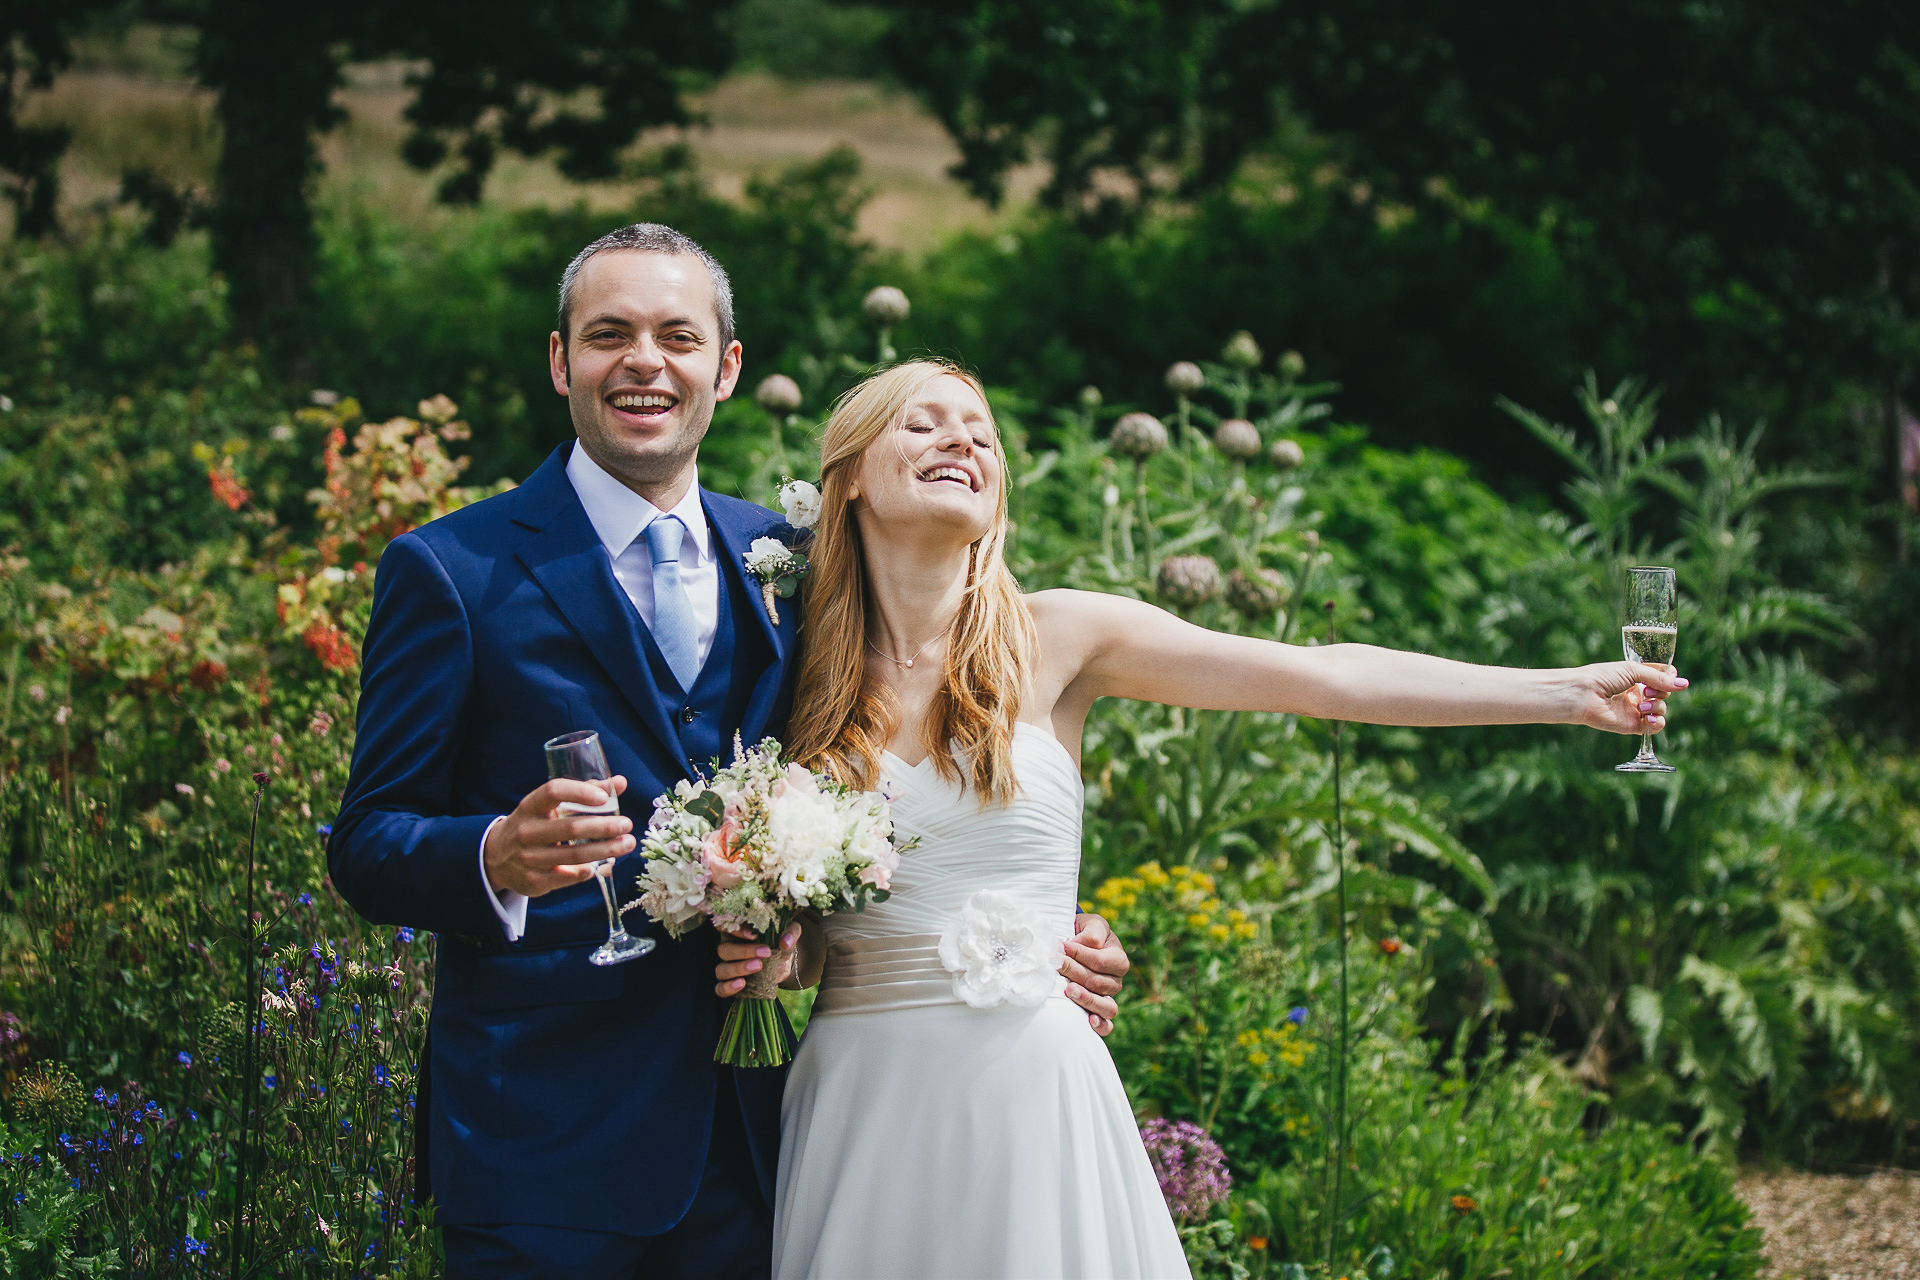 Bride and groom looking happy with champagne in a garden